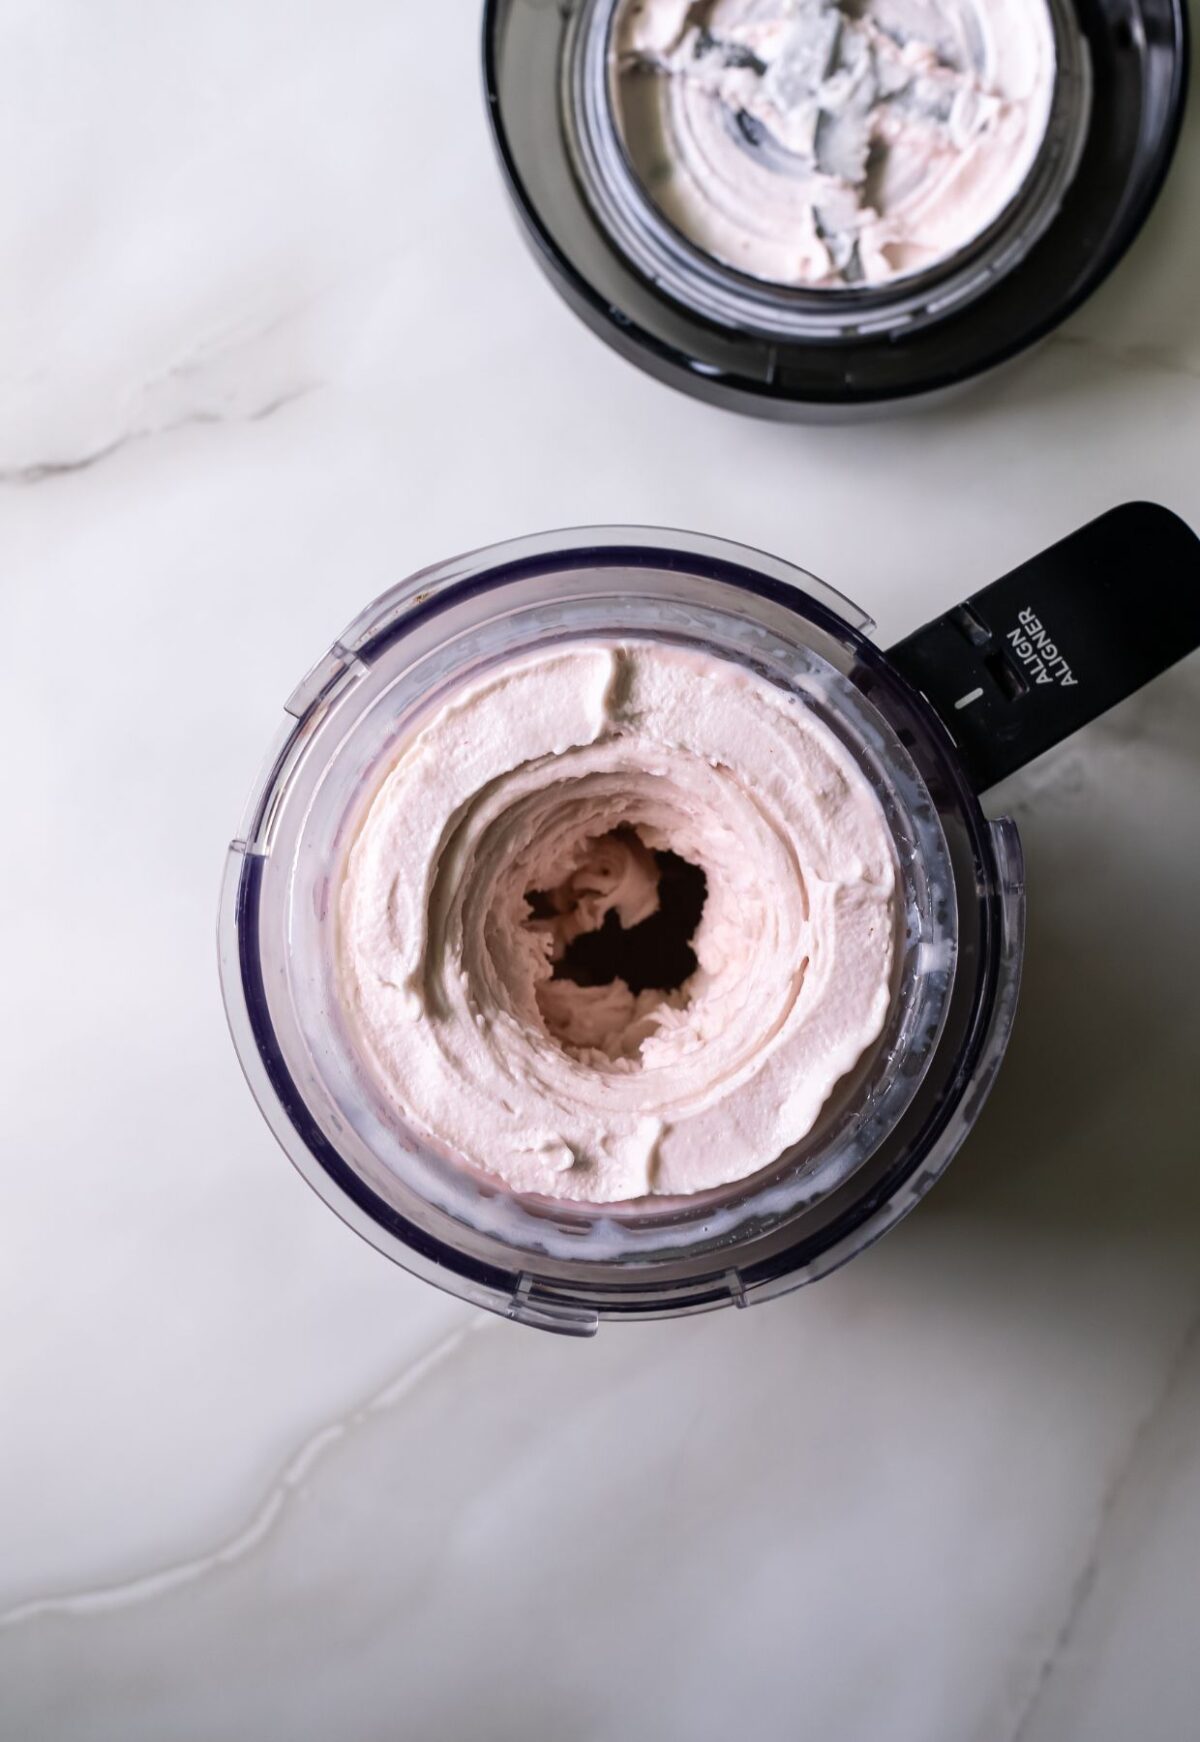 A top view of a food processor bowl filled with creamy, light pink mixture and an attached lid with a black handle placed nearby on a marble surface.